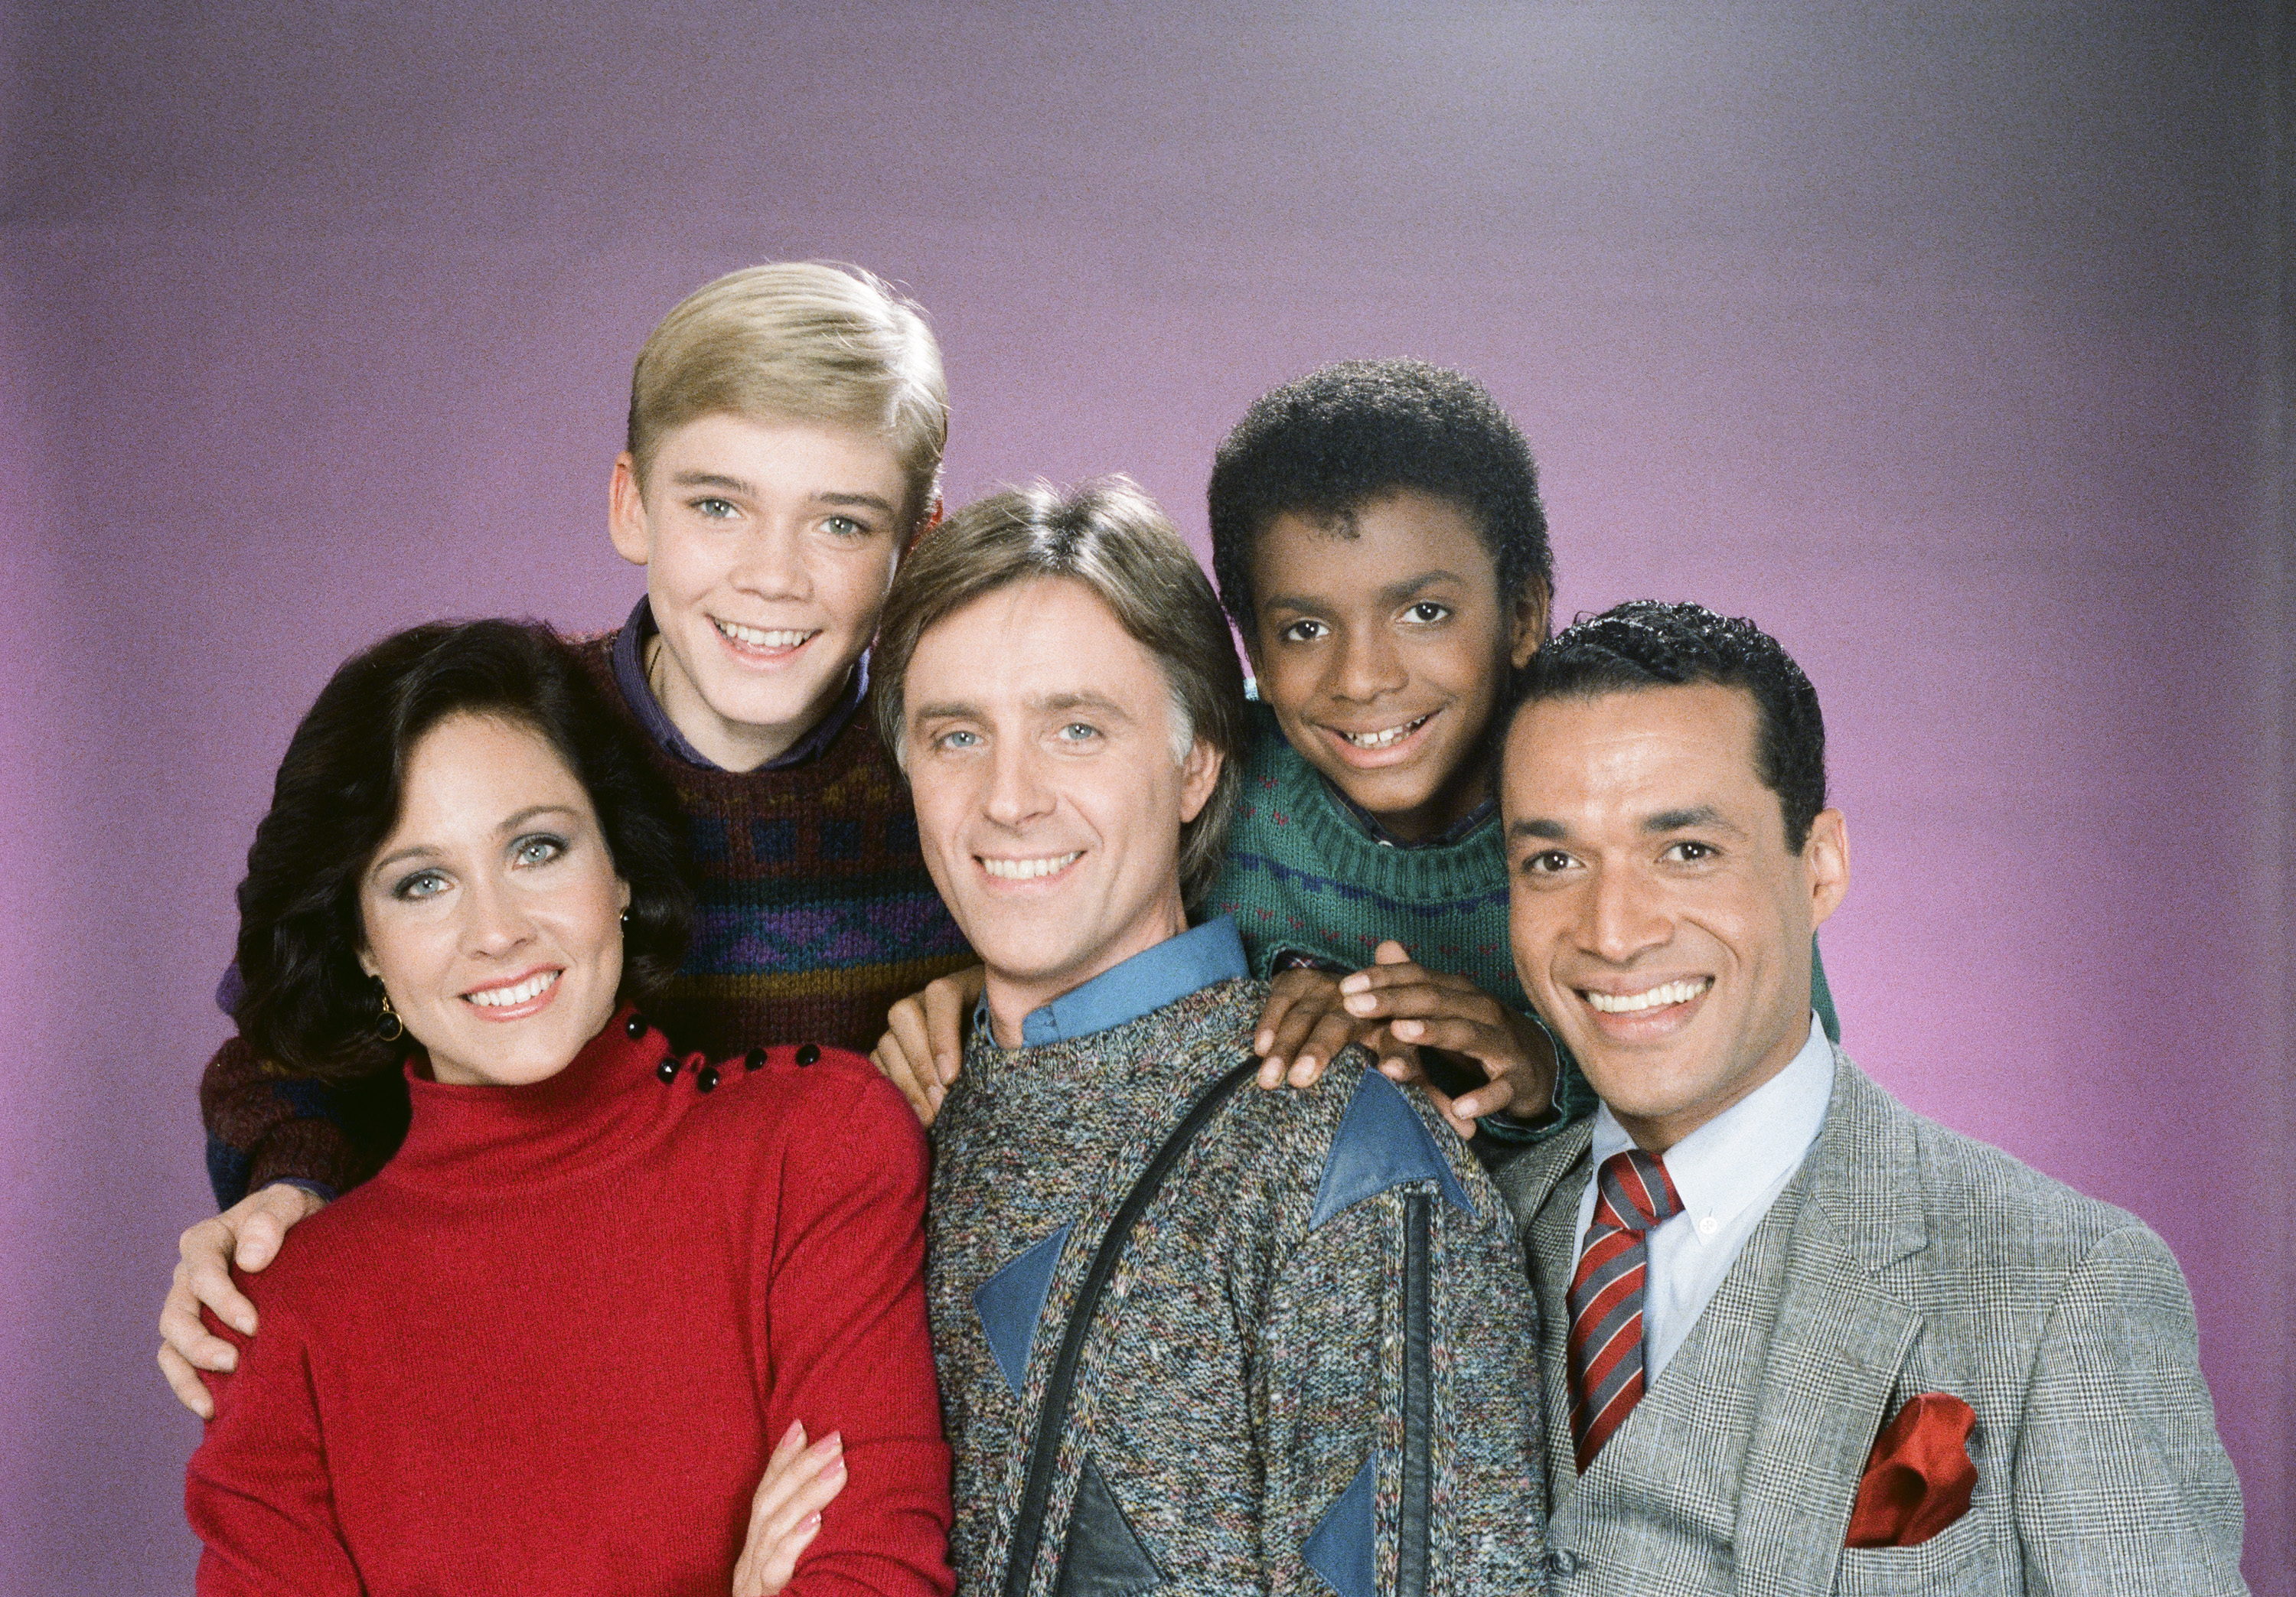 Erin Gray, Joel Higgins, Franklyn Seales, Ricky Shroder, and Alfonso Ribeiro in "Silver Spoons," 1984 | Source: Getty Images